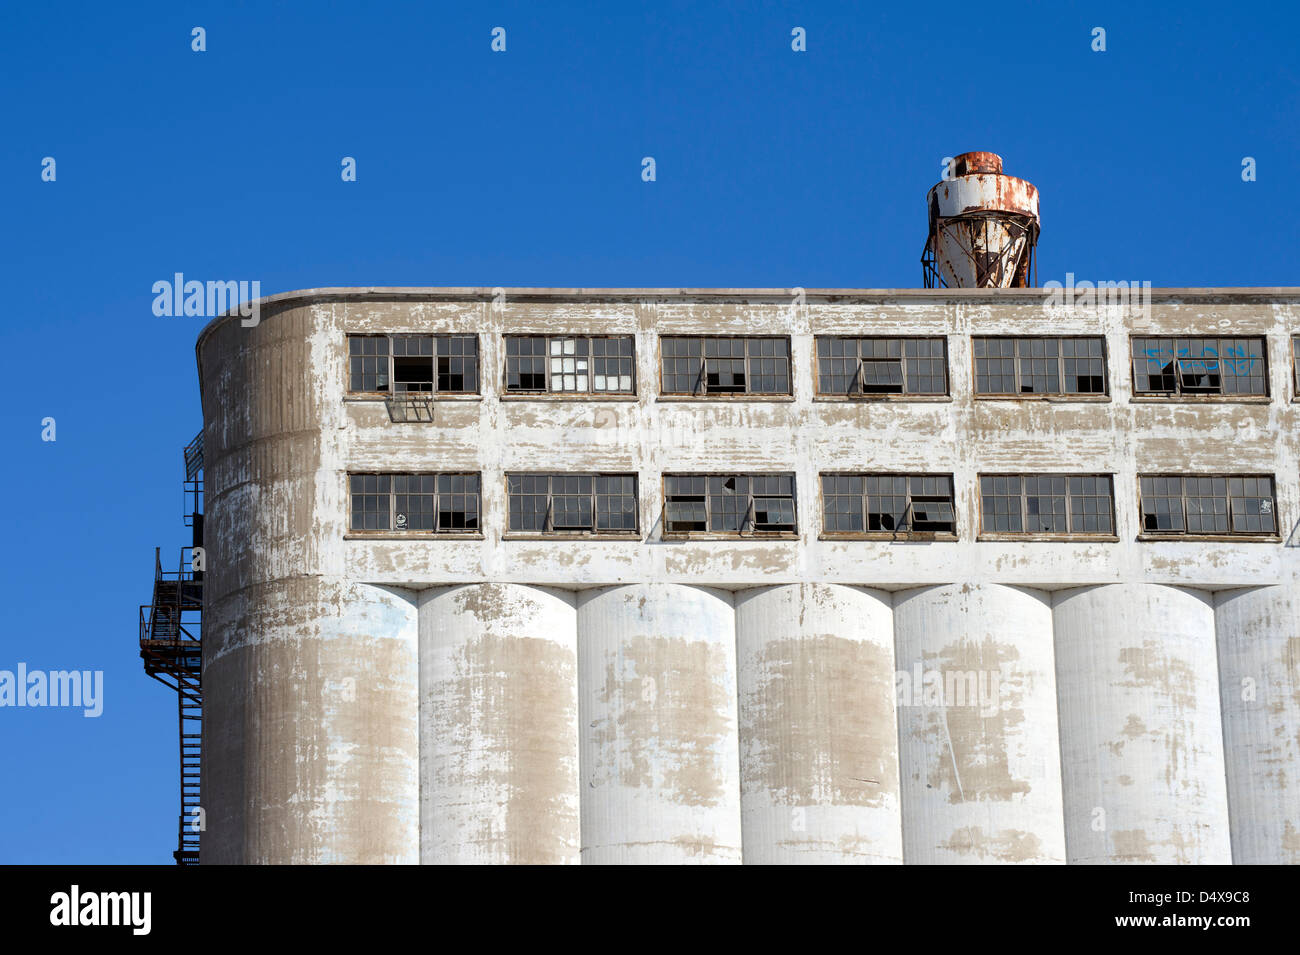 Detail of grain elevator #5, port of Montreal. Built and expanded between 1903 and 1958, it was shut down in 1994. Stock Photo